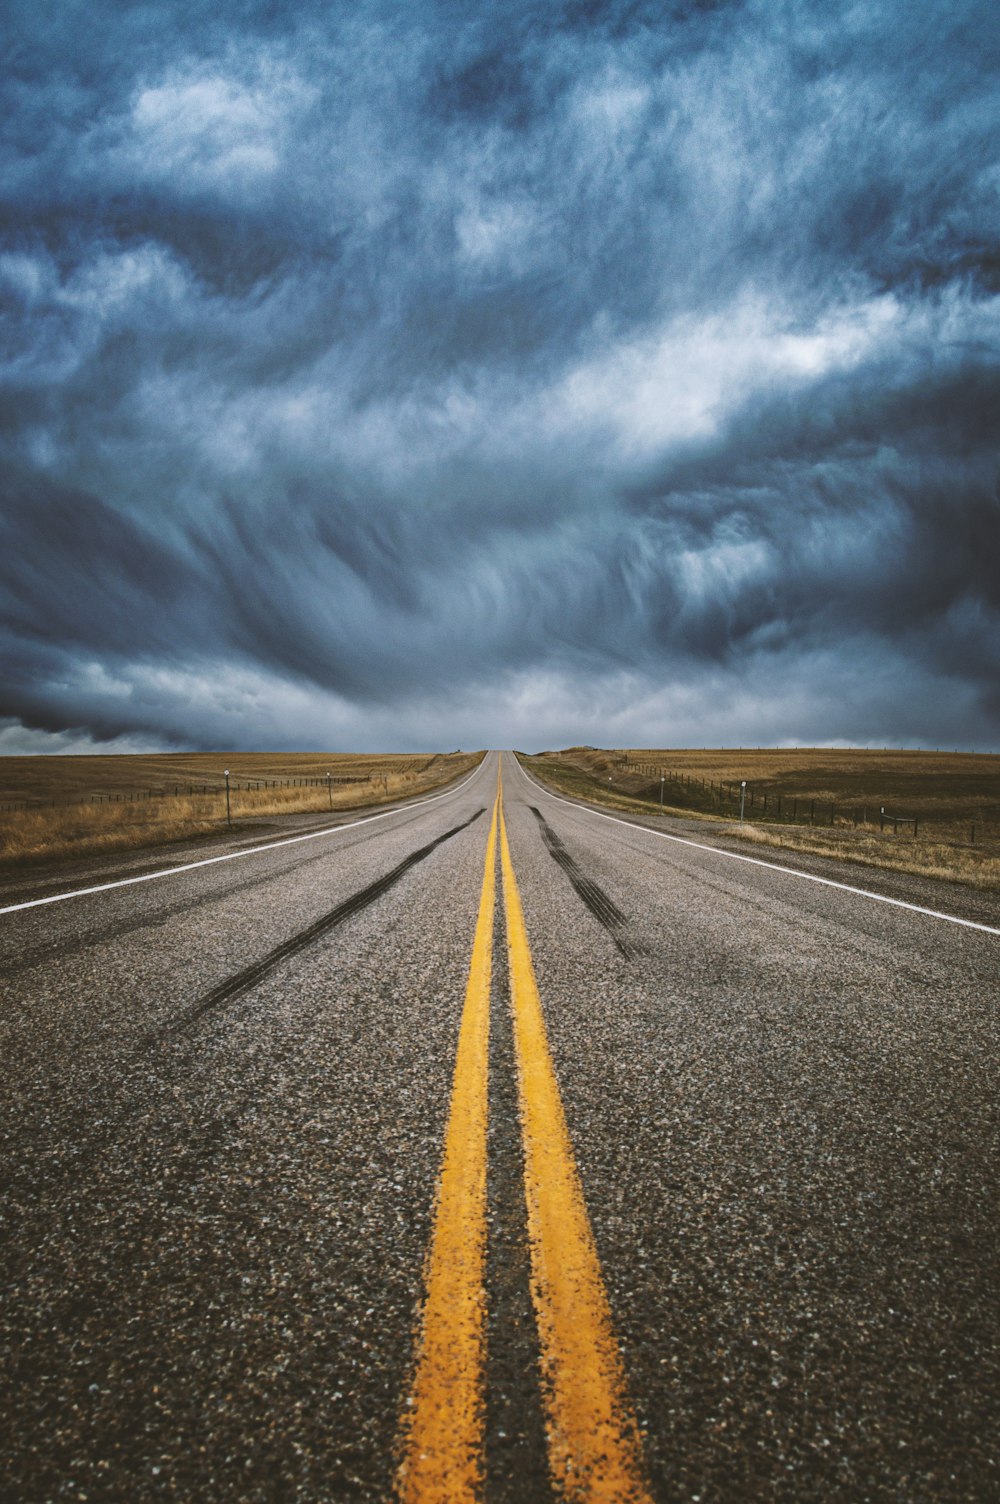 a long straight road stretches into the distance under a cloudy sky